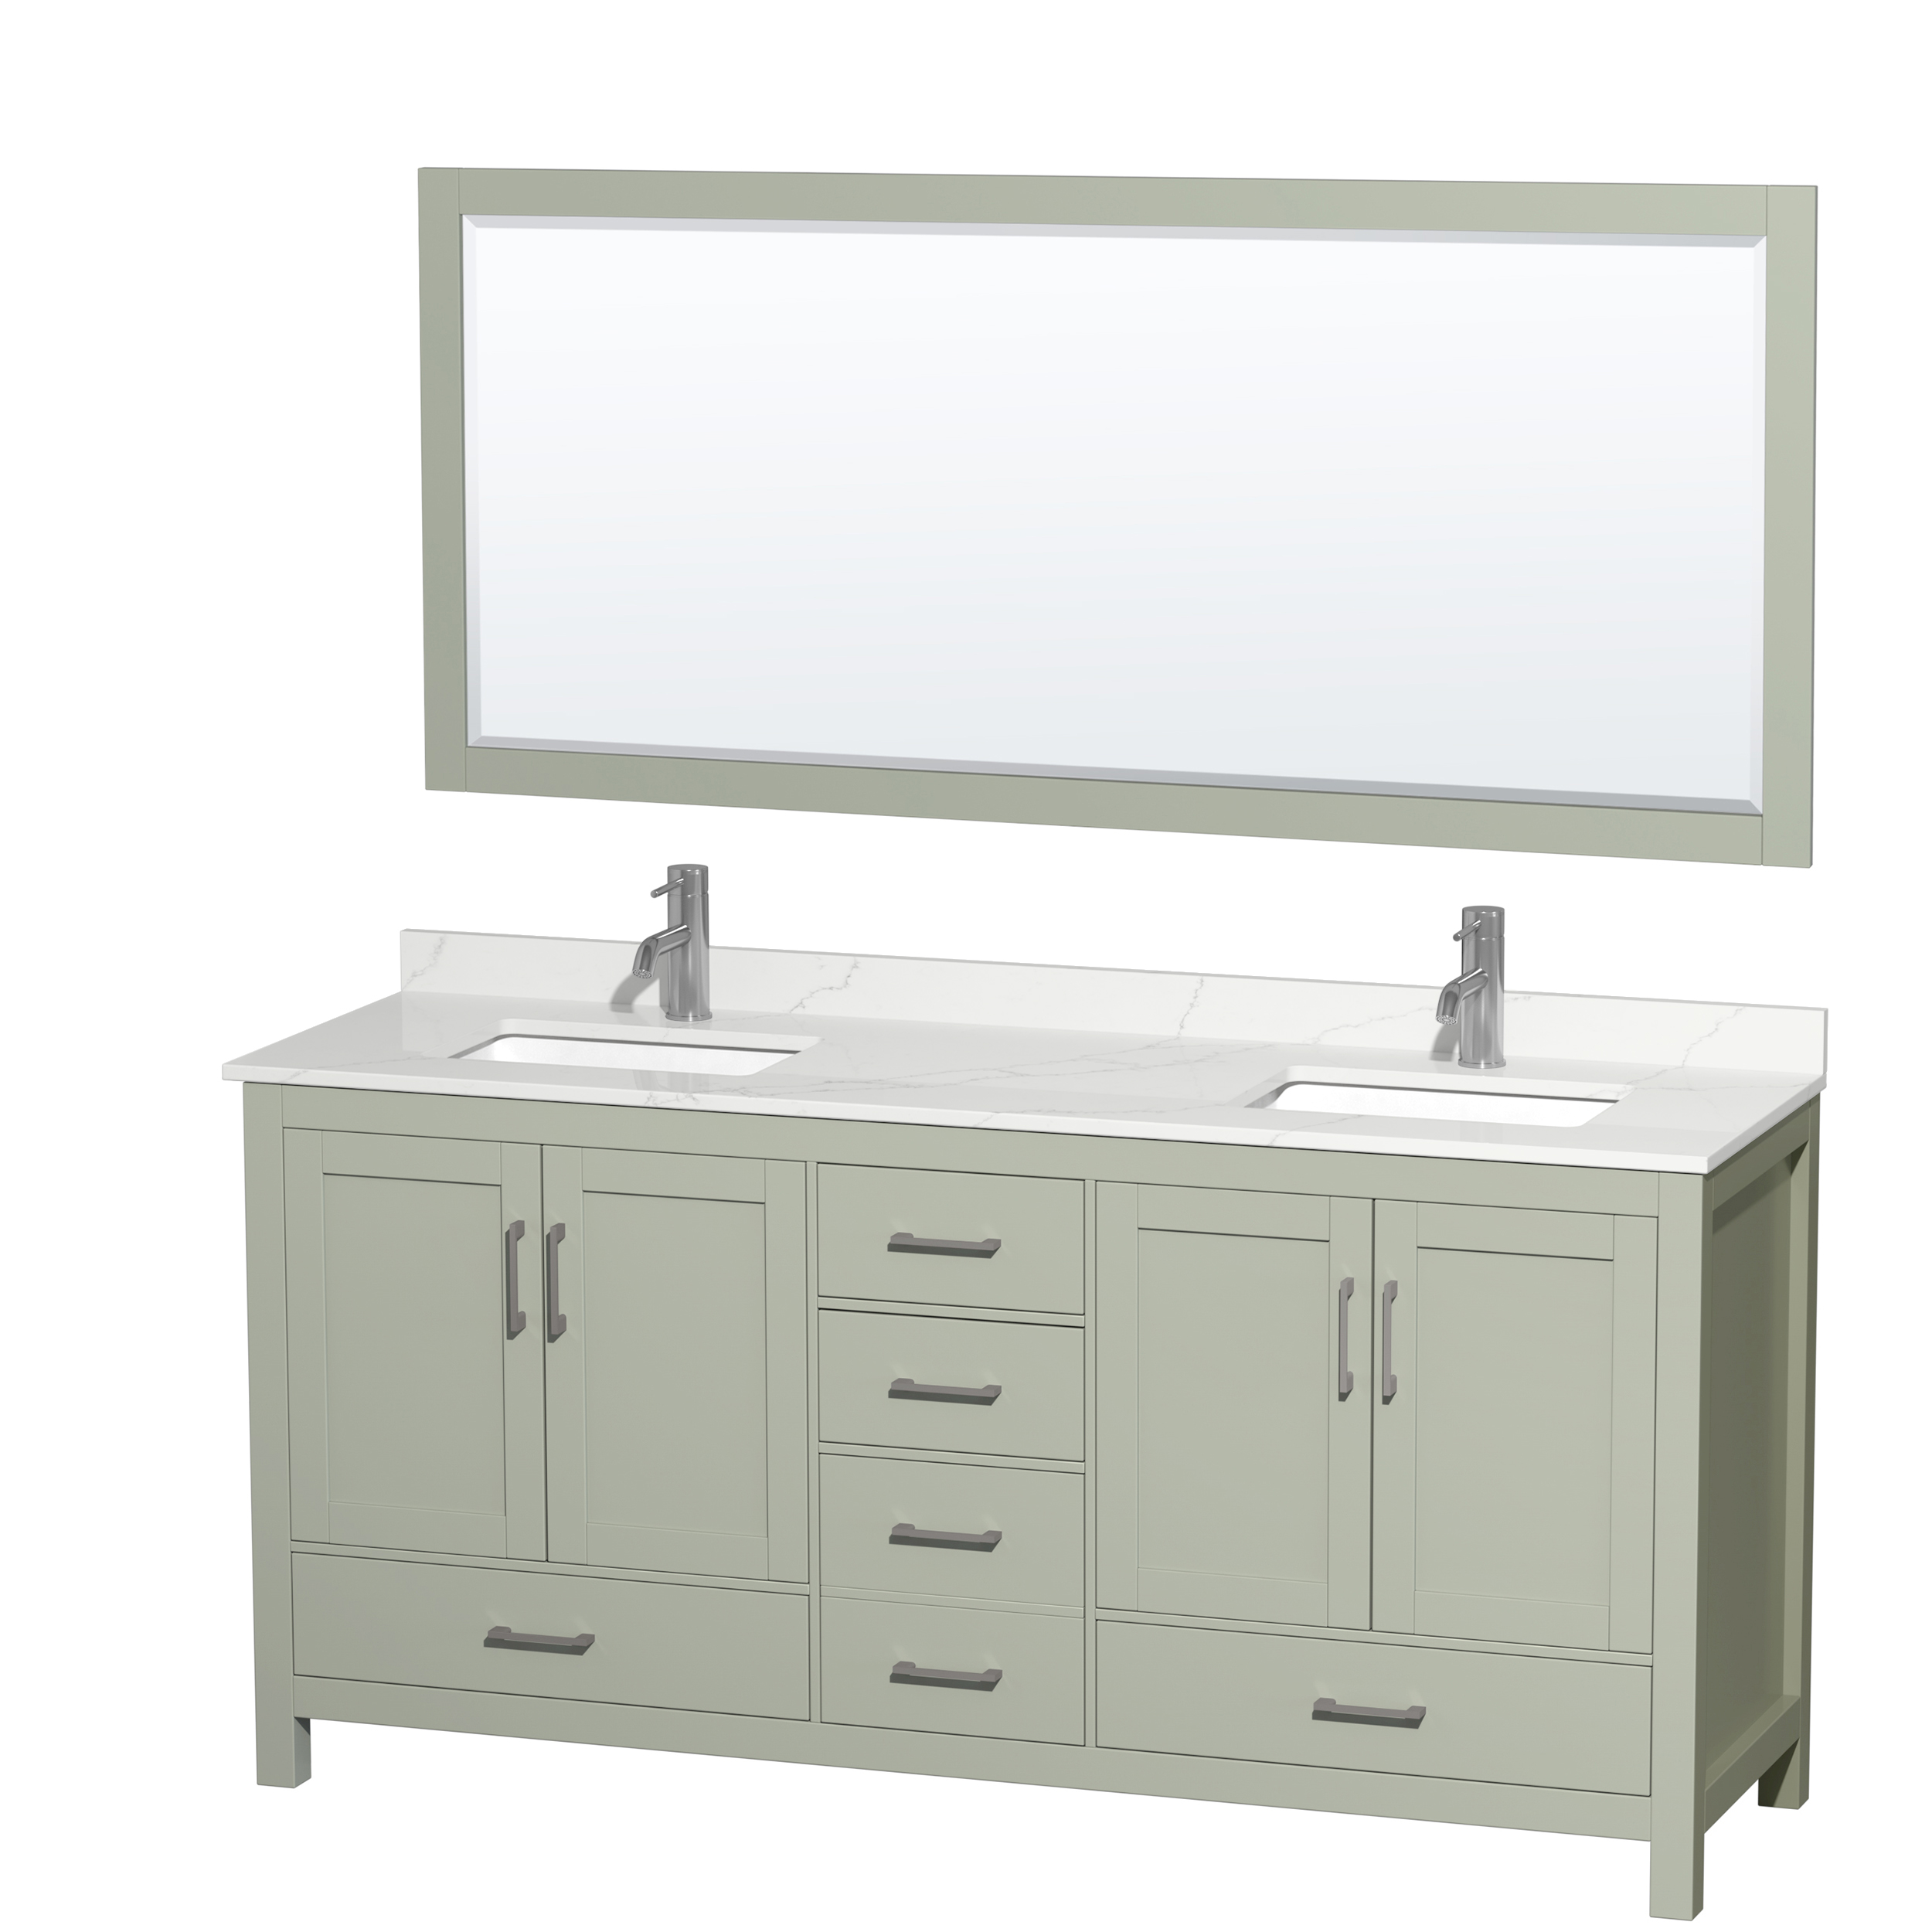 sheffield 72" double bathroom vanity by wyndham collection - light green